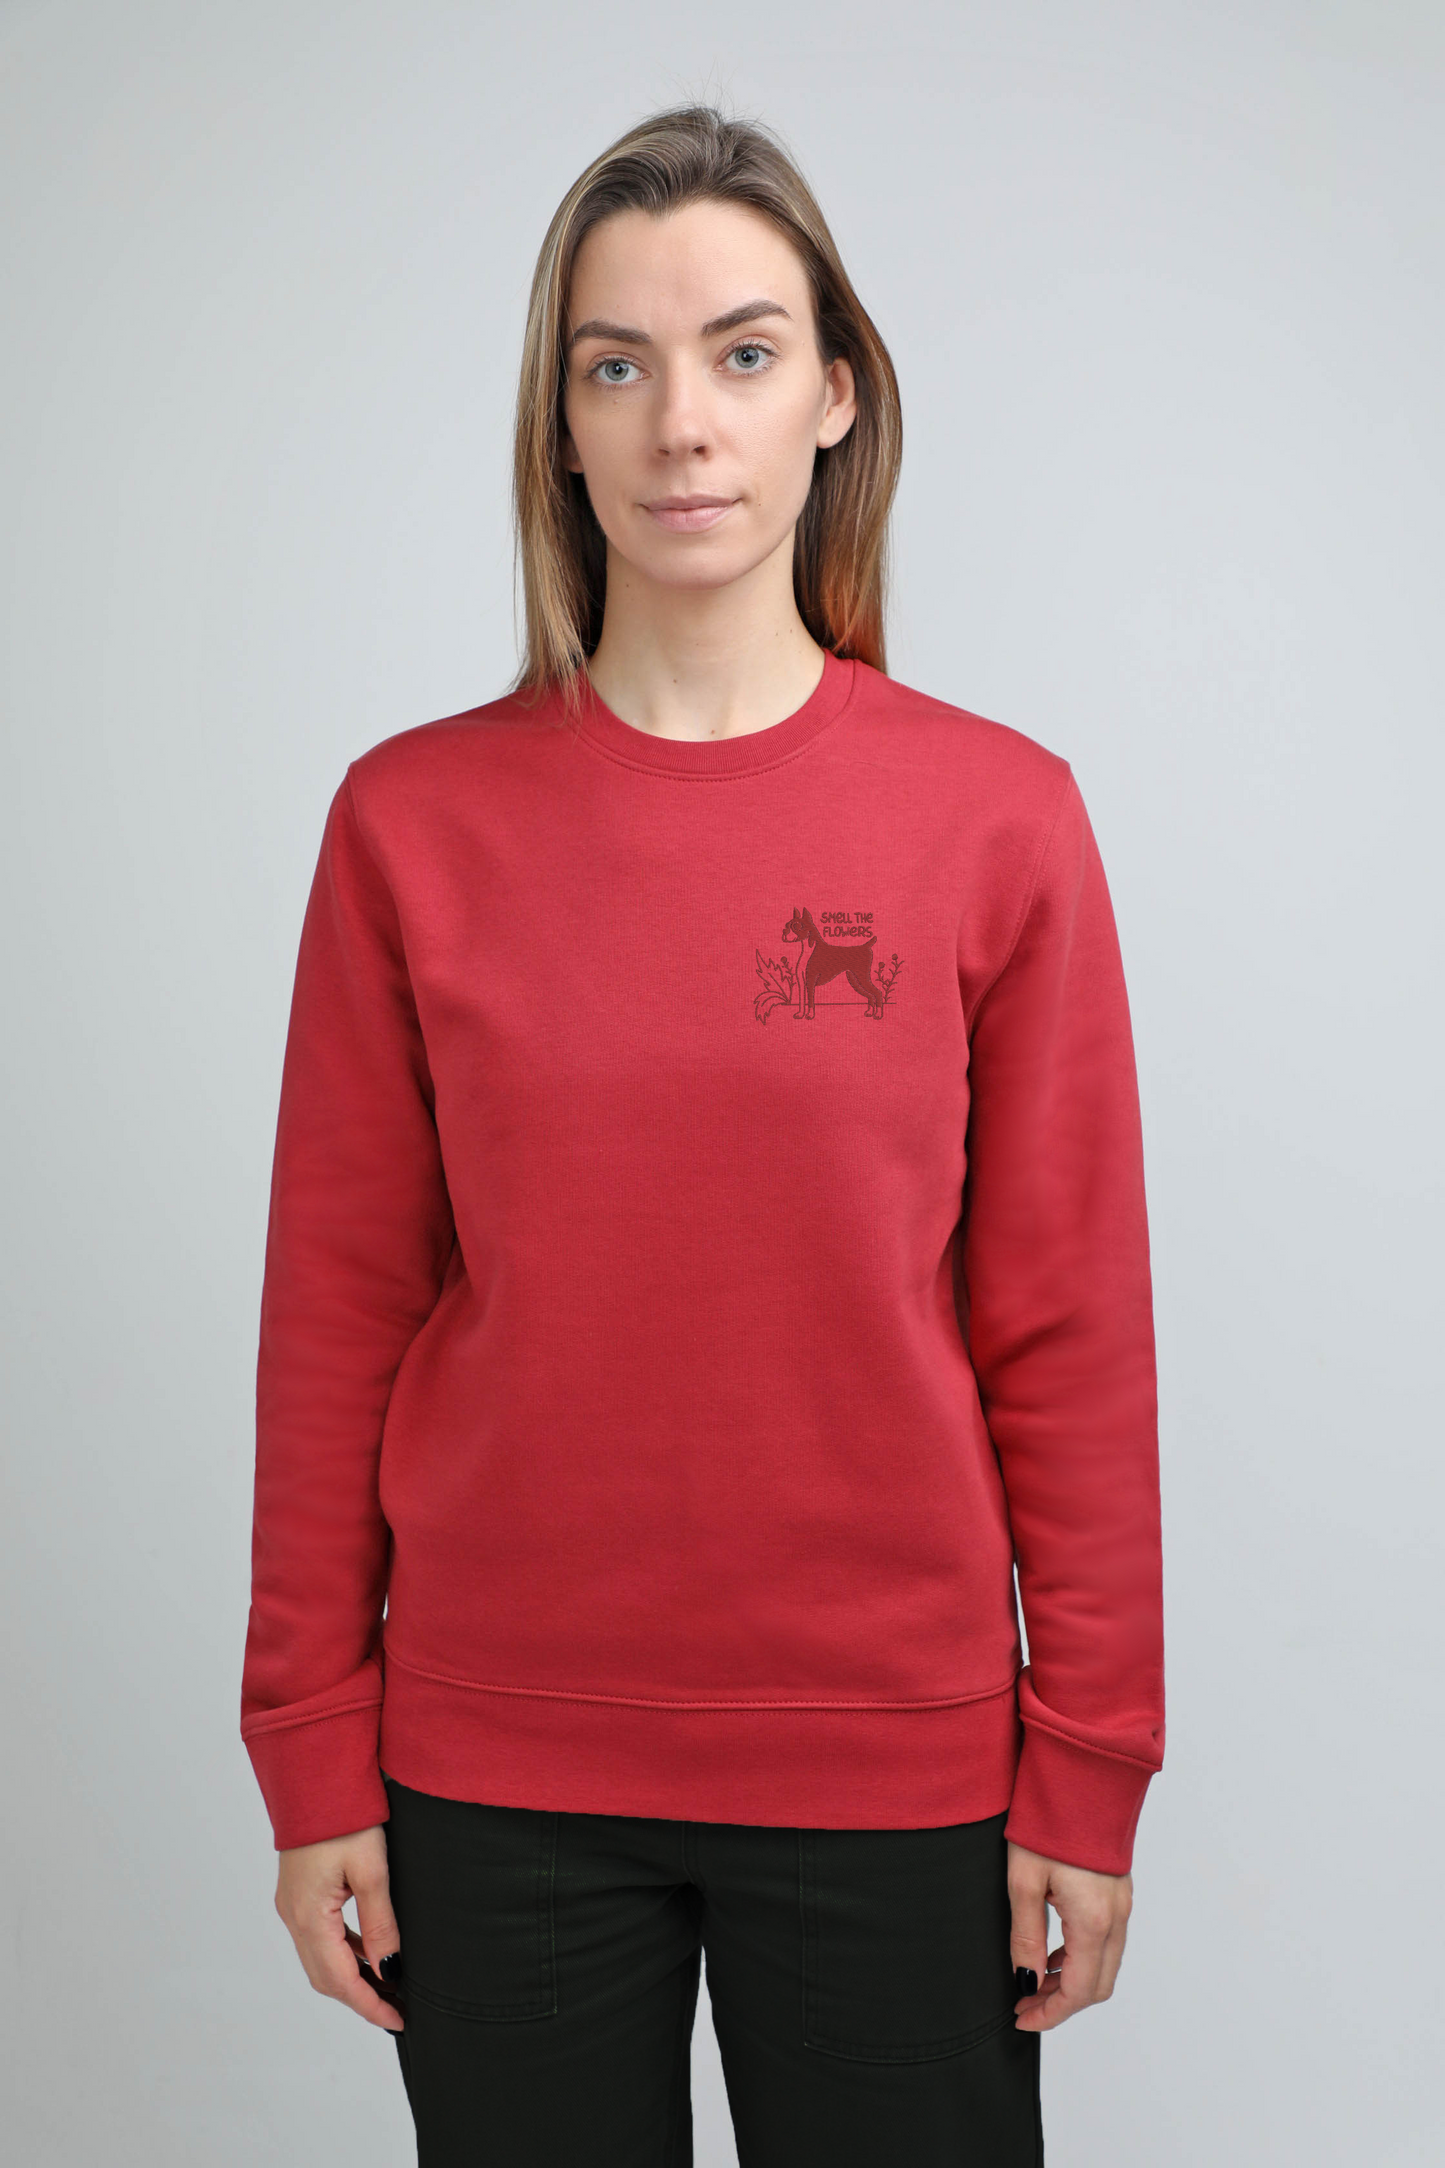 XL available only | Smell the flowers | Crew neck sweatshirt with embroidered dog. Regular fit | Unisex by My Wild Other